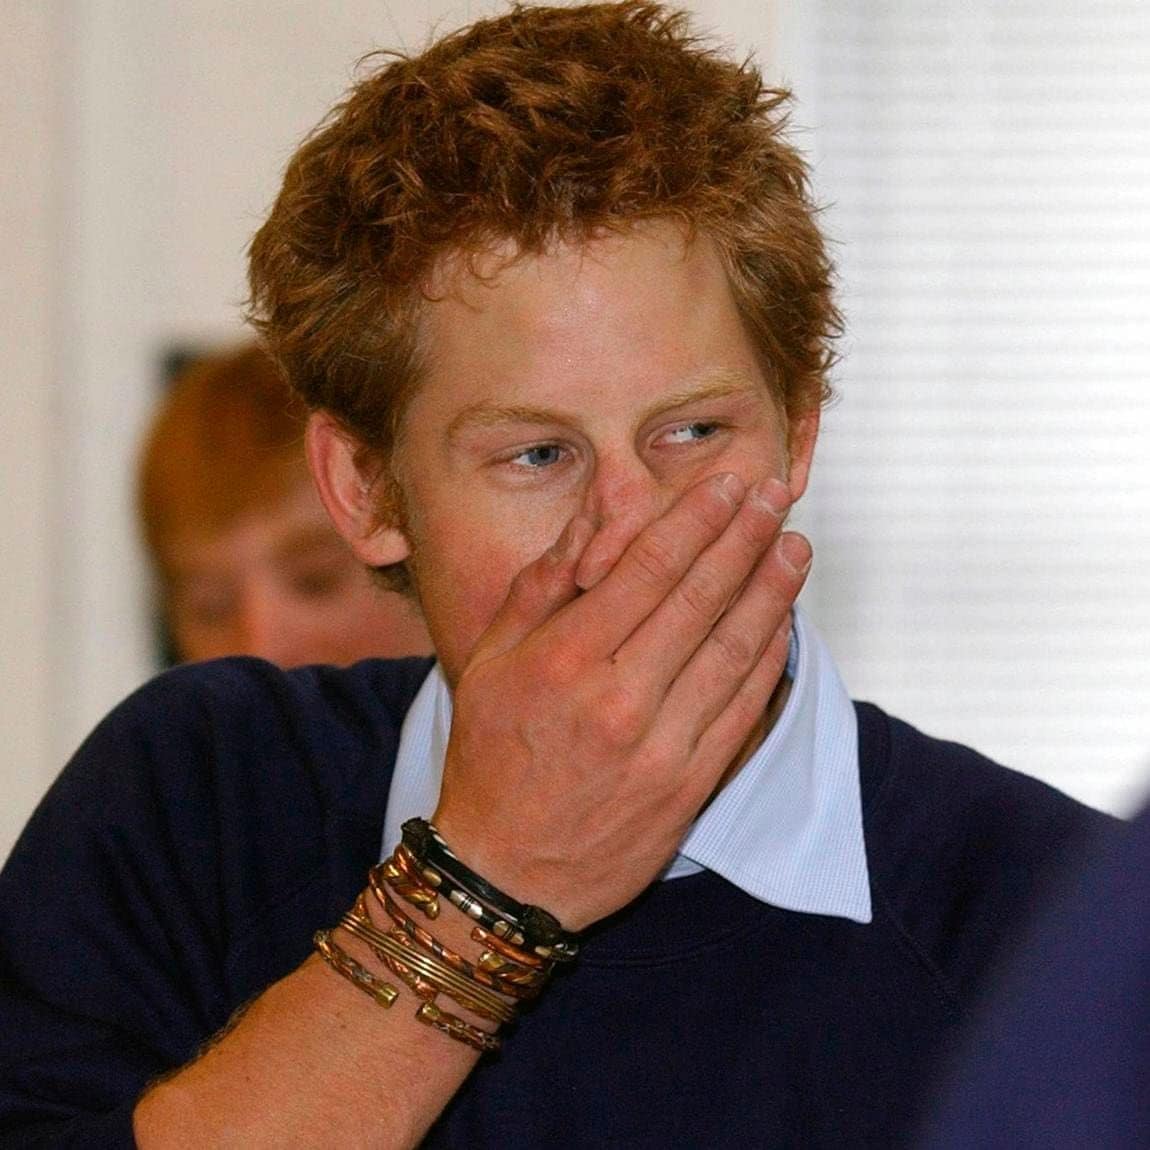 The Duke of Sussex has amassed a large collection of bracelets